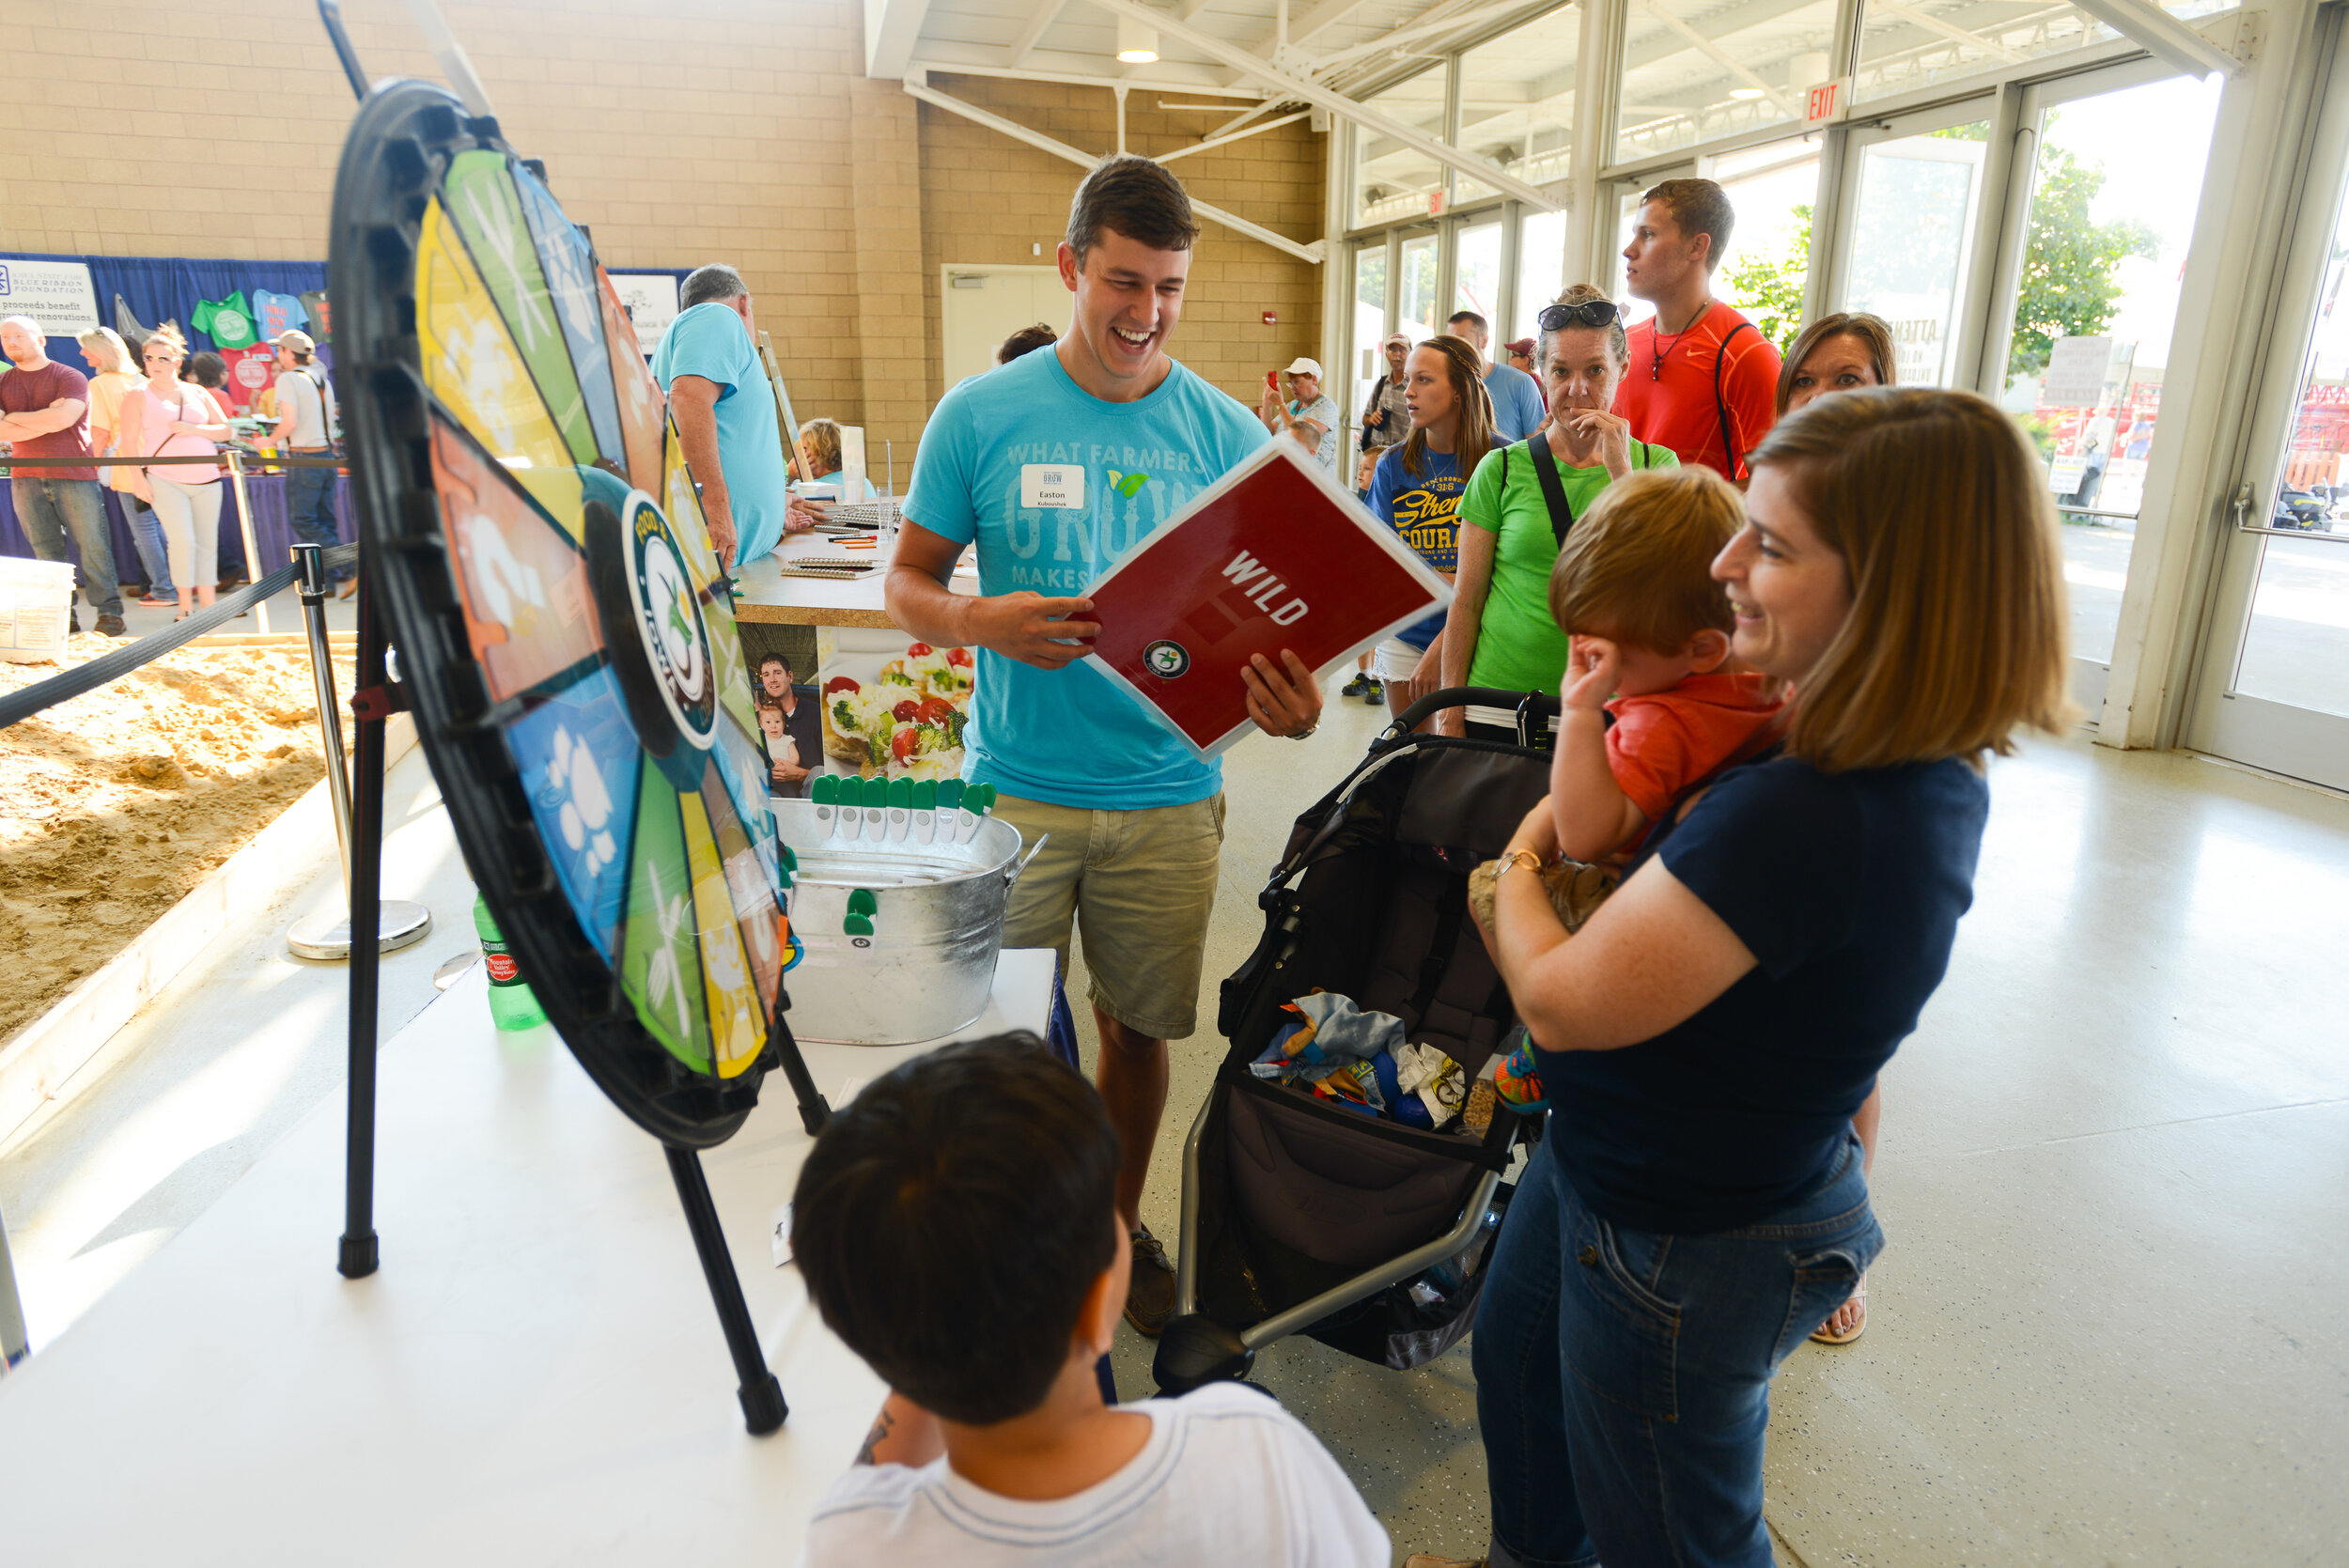 Fairgoers try their luck with the Iowa FFP trivia spin wheel during the 2015 fair.